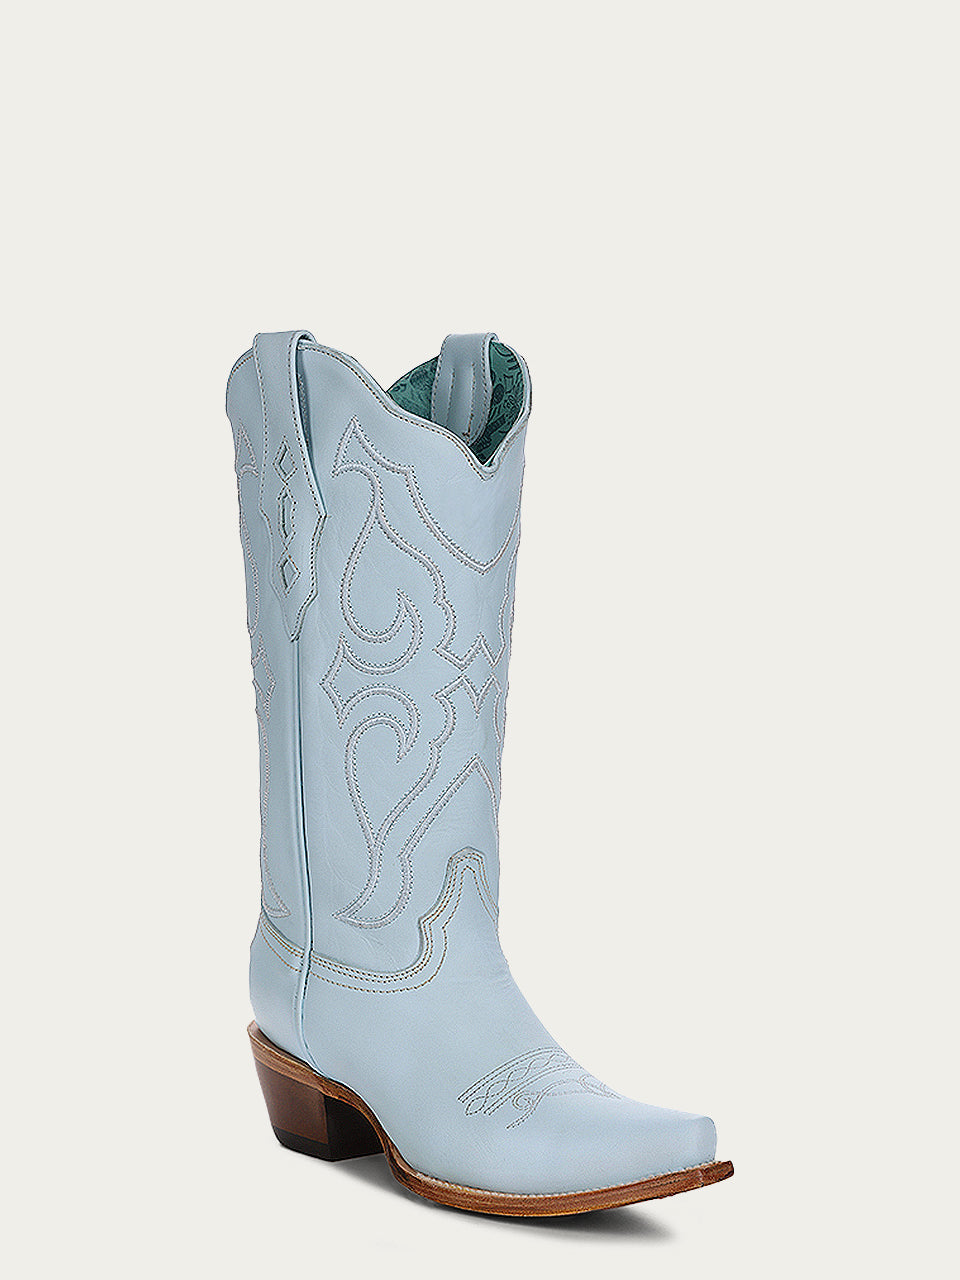 Z5253 - WOMEN'S BABY BLUE EMBROIDERY SNIP TOE COWBOY BOOT